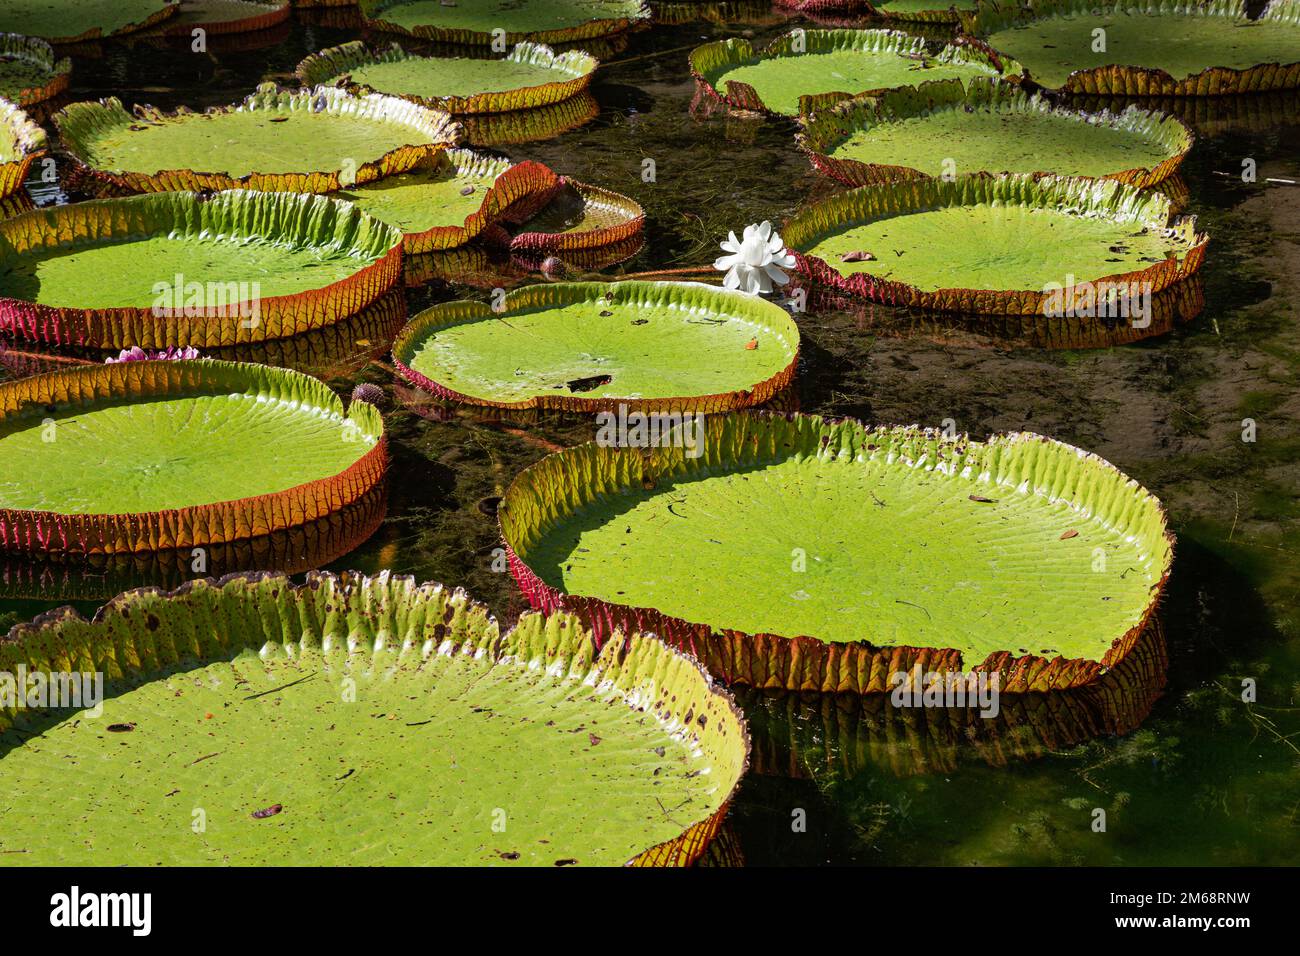 Giant water lily Victoria amazonica regia at Sir Seewosagur Ramgoolam Botancial Garden in Pamplemousses, Mauritius Stock Photo